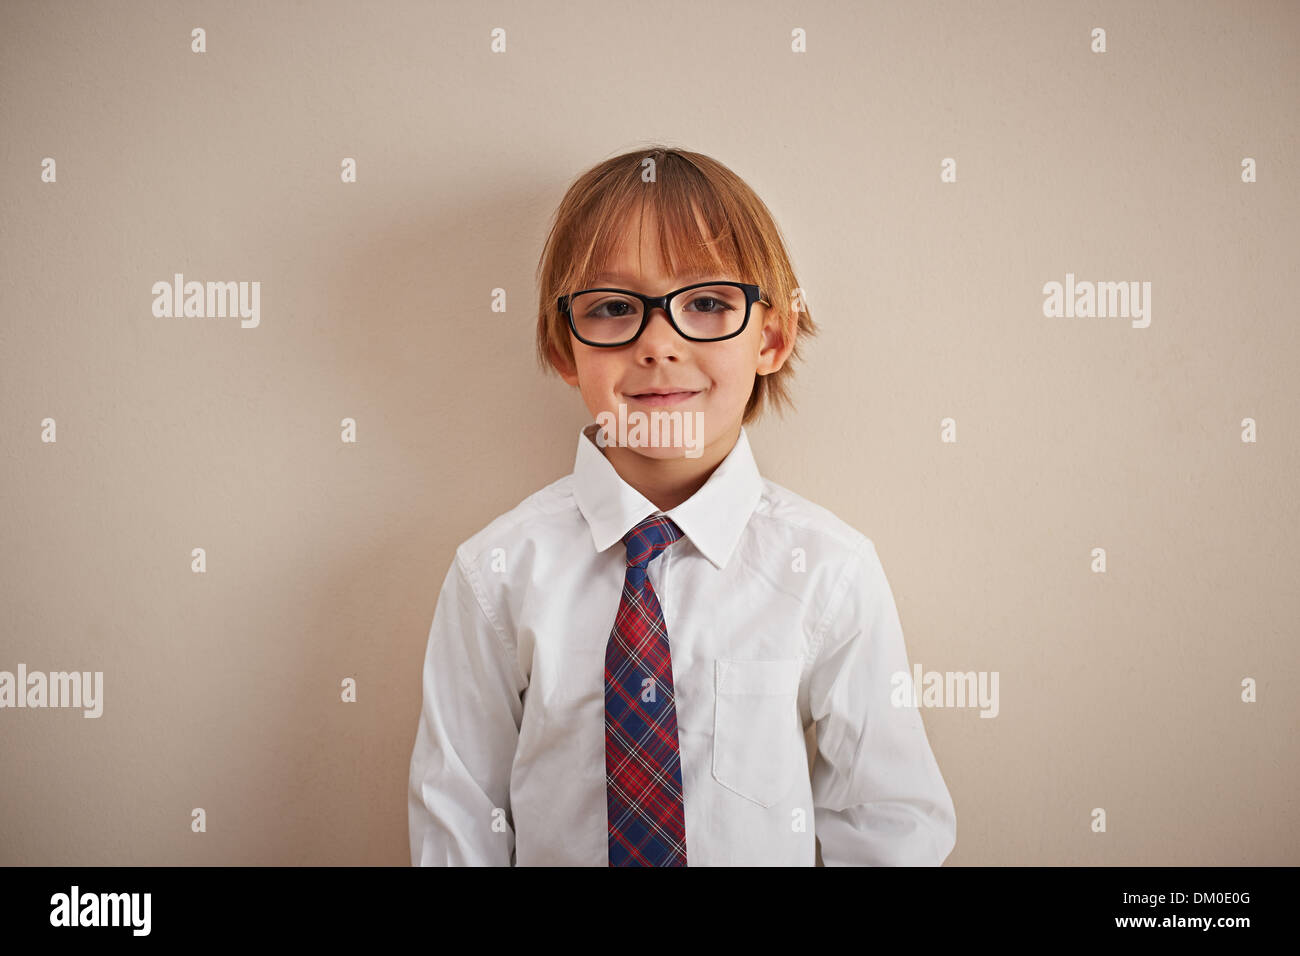 Young corporate business boy in a shirt and tie Stock Photo